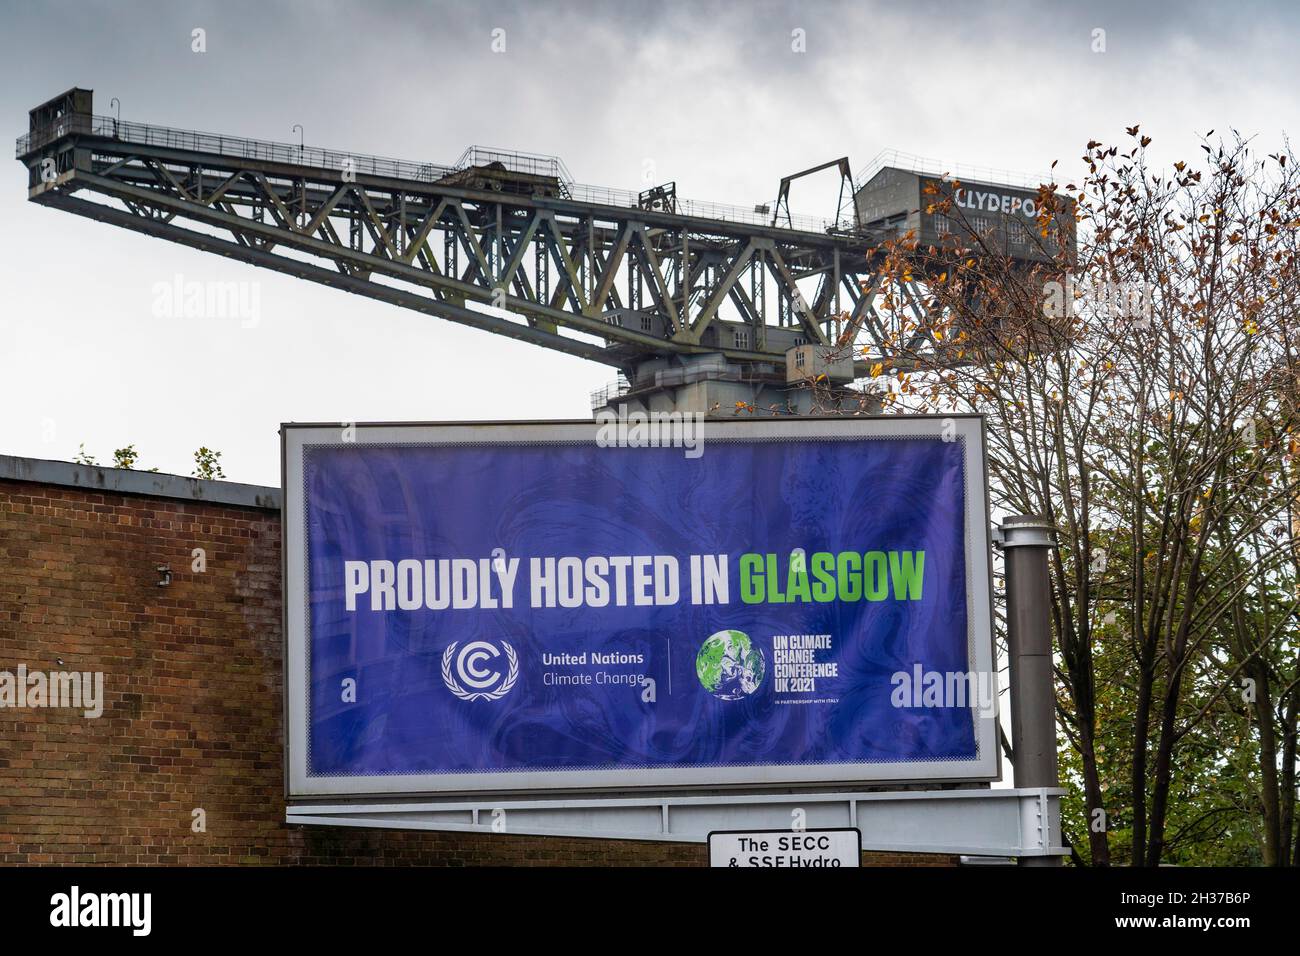 Glasgow, Scotland, UK. 26th October 2021. With less than a week to go until start of UN Climate Change Conference in Glasgow the site has been surrounded by ring of steel security fences. The adjacent Clydeside Expressway is also  closed to traffic.  Iain Masterton/Alamy Live News. Stock Photo